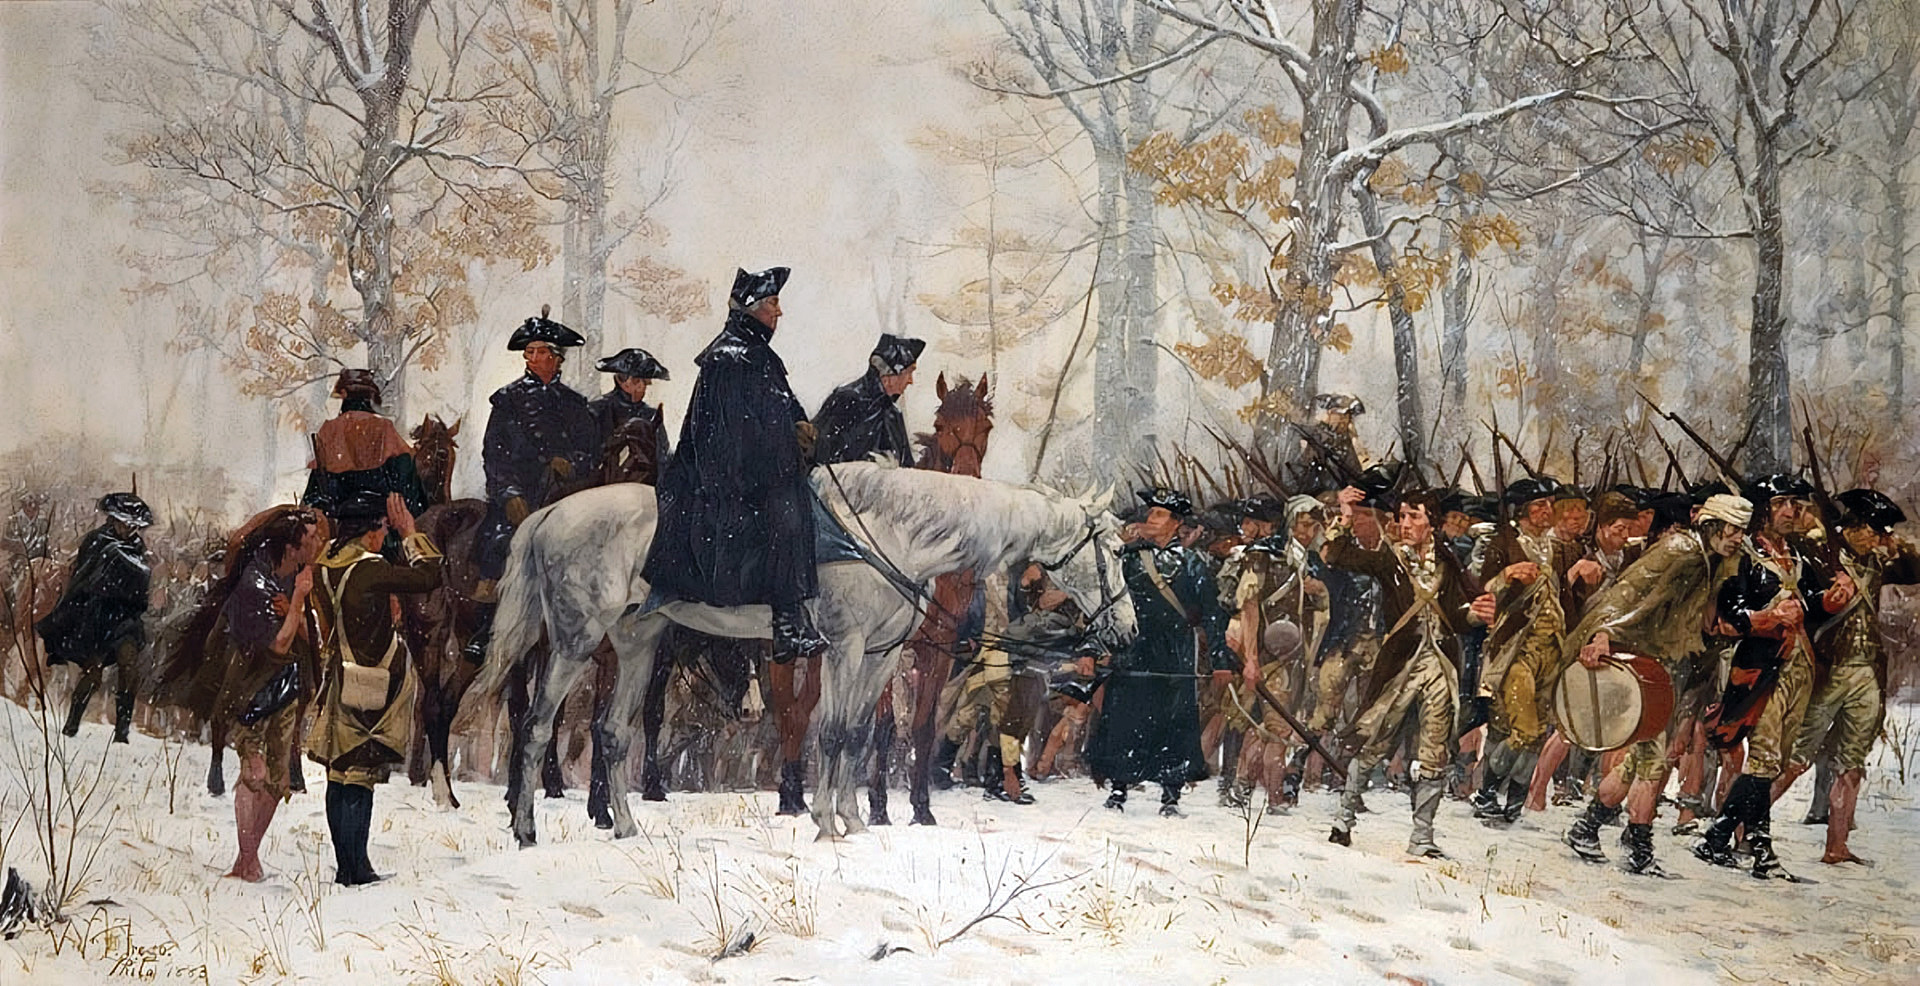 The Continental Army marches into winter quarters at Valley Forge in December 1777. Of the 12,000 American soldiers who marched into the camp, 2,500 would perish during the harsh winter.